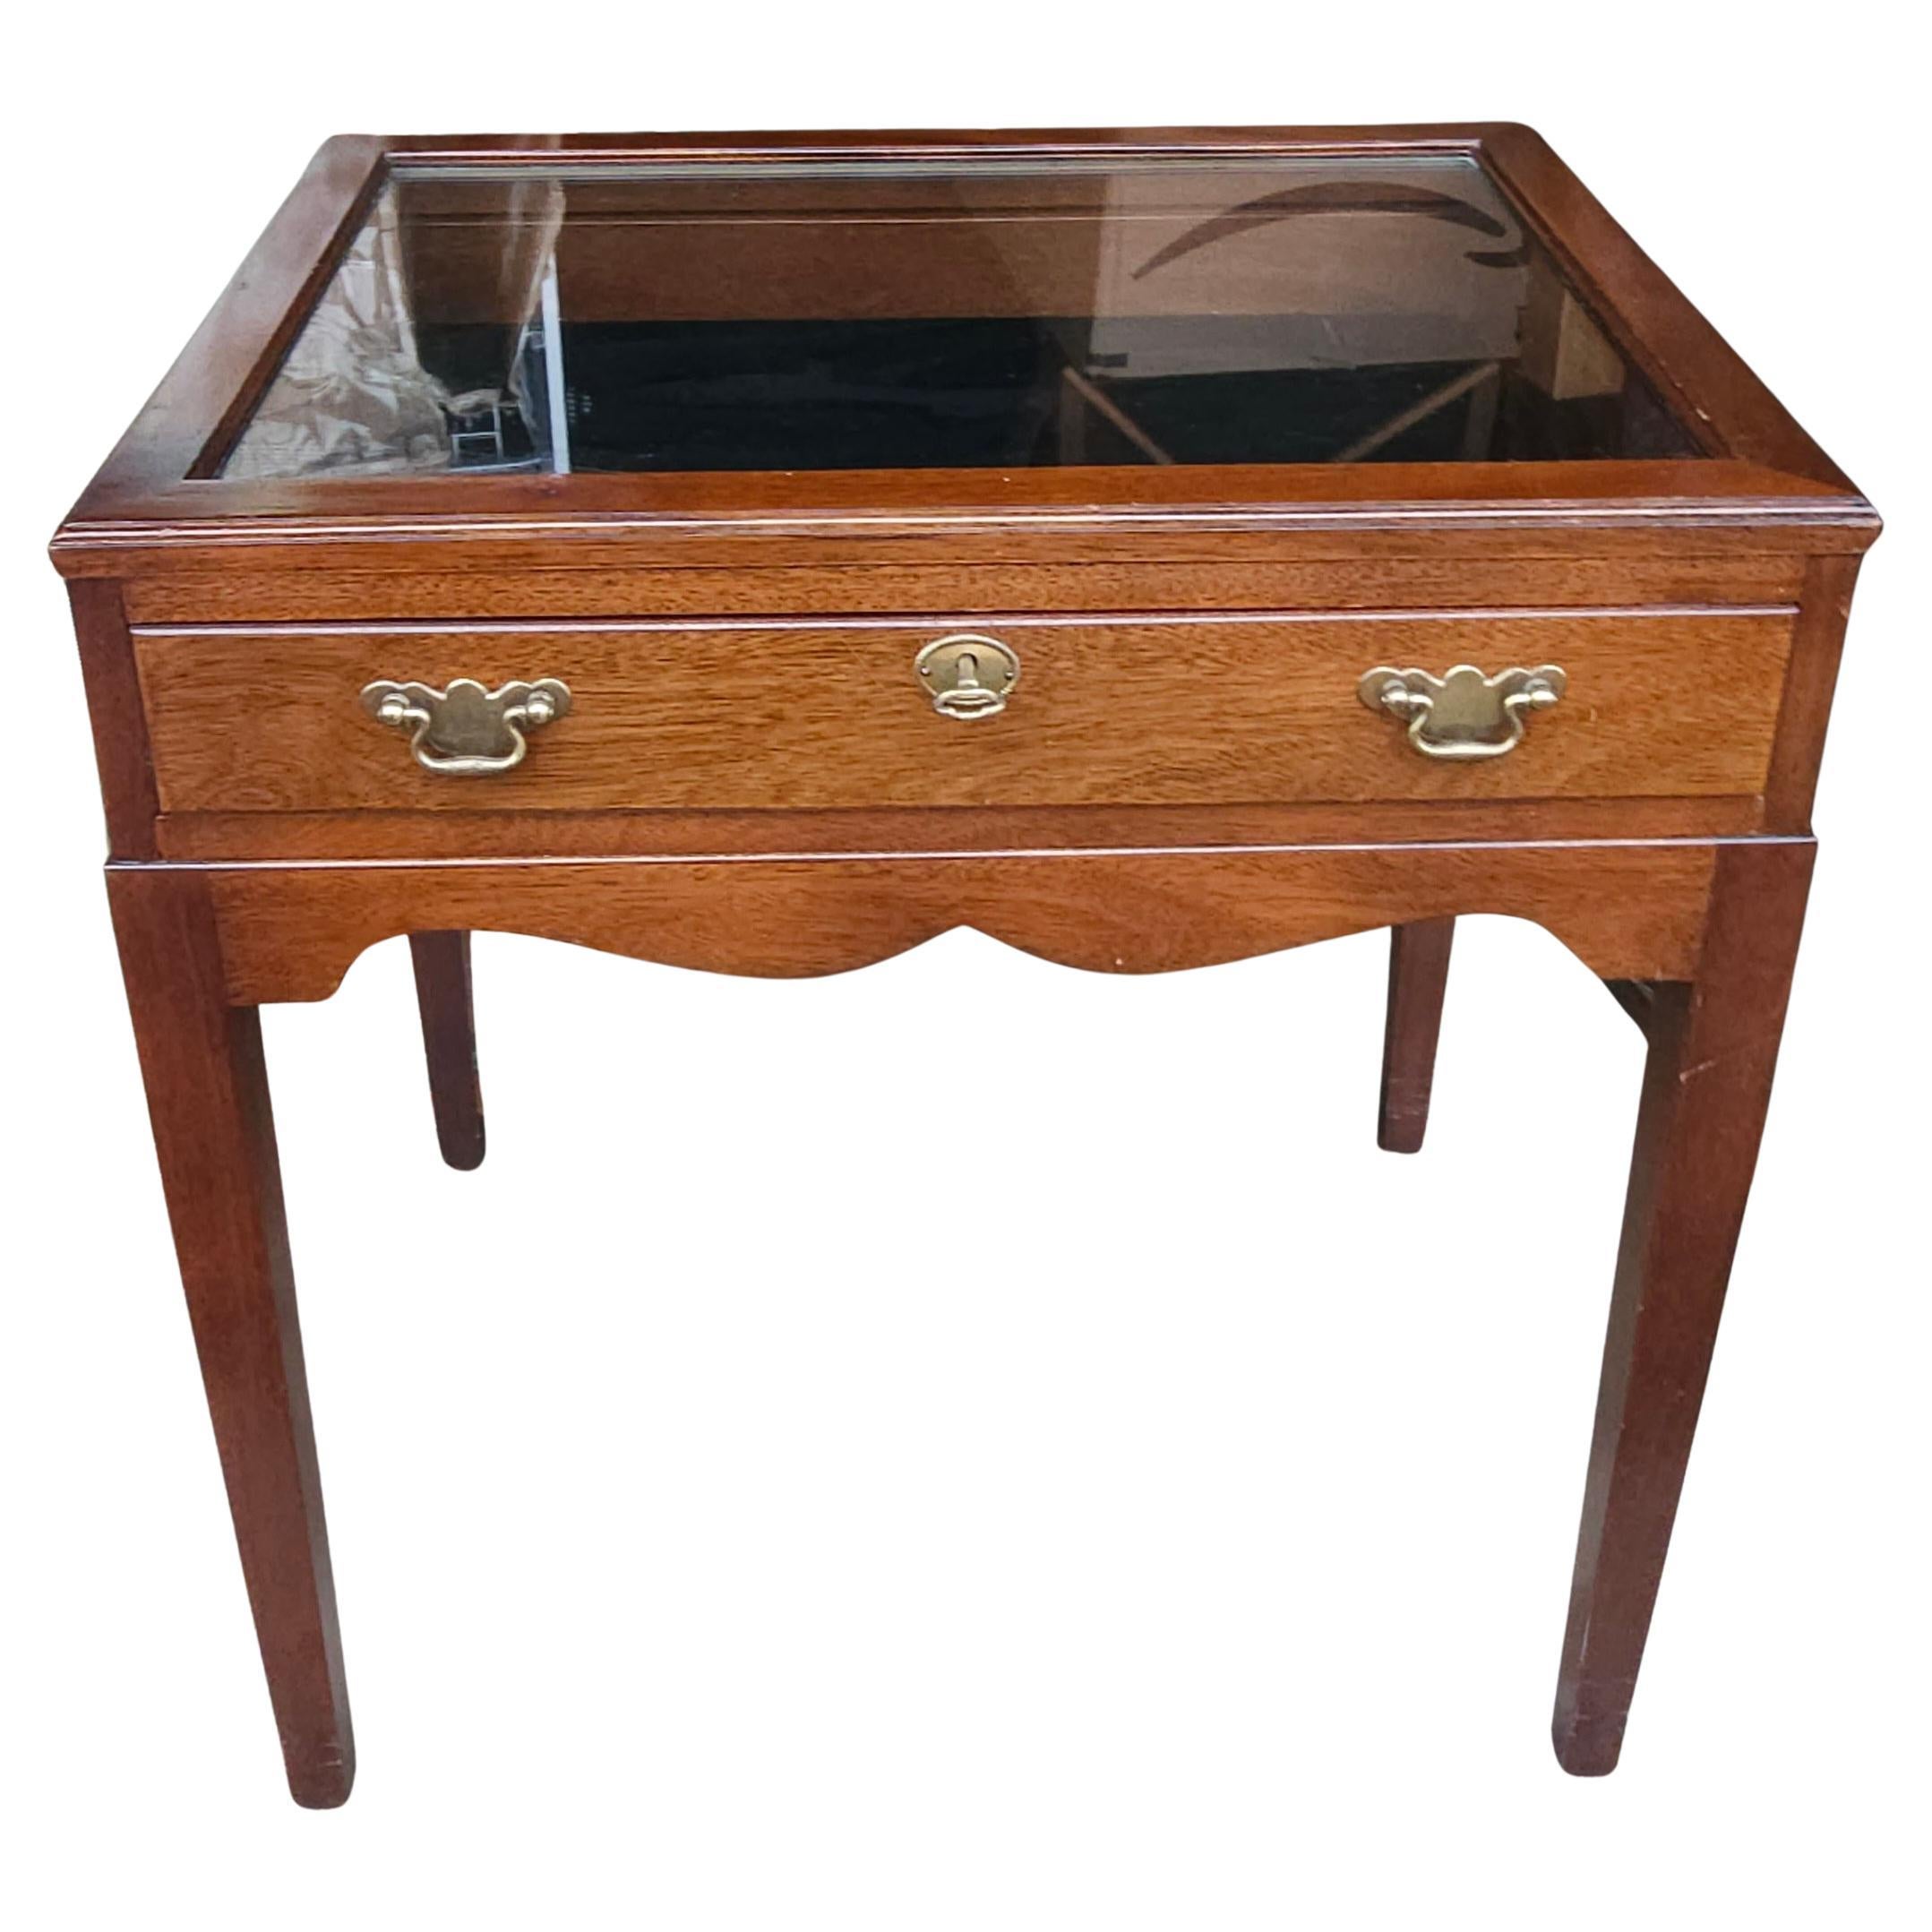 20th Century Mahogany and Velvet Lined with Glass Top Lockable Display Table